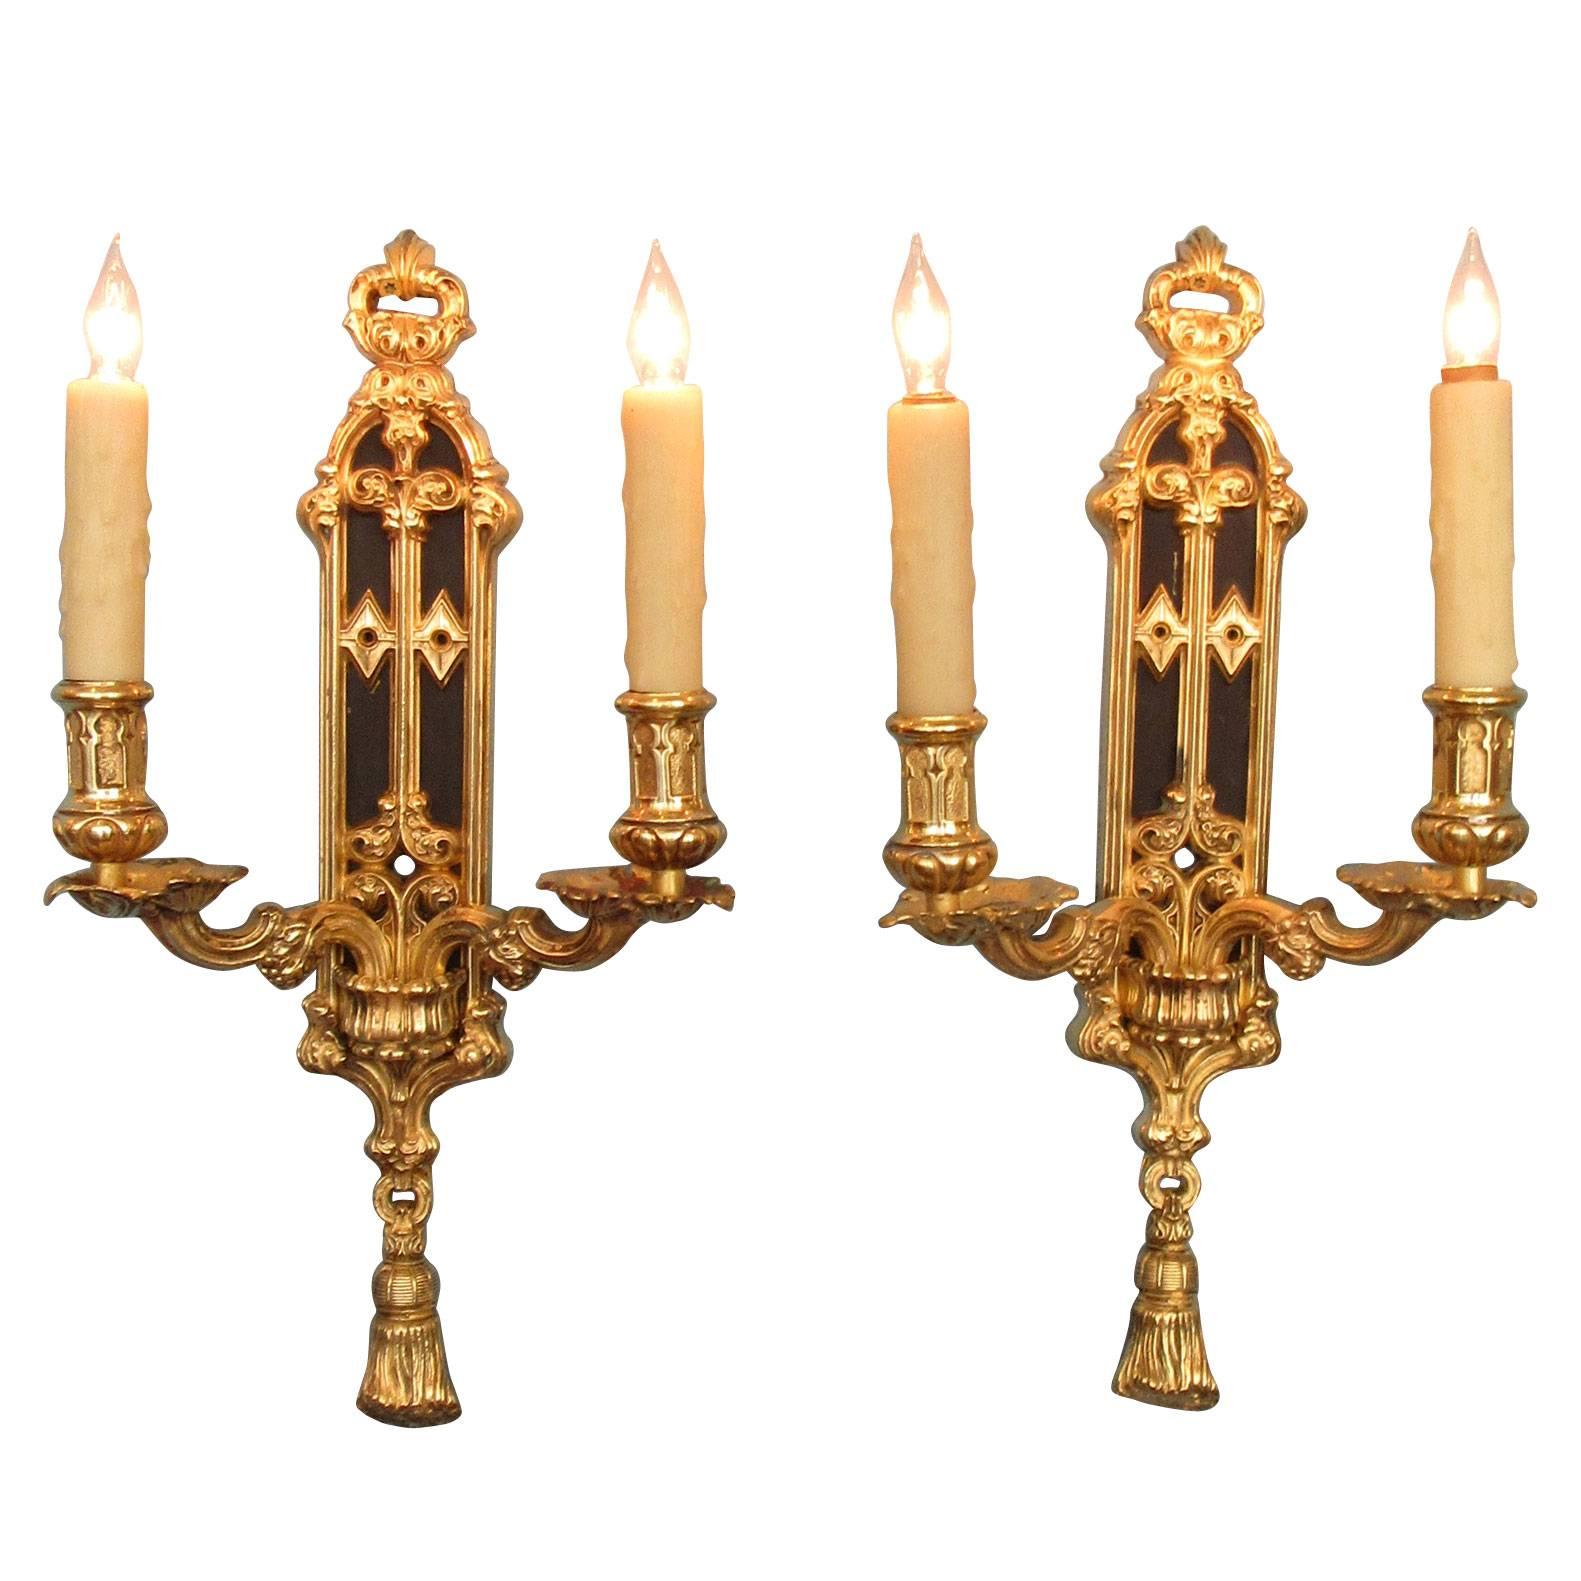 Pair of Mid 19th C English Gothic Bronze Doré and Patinated Sconces